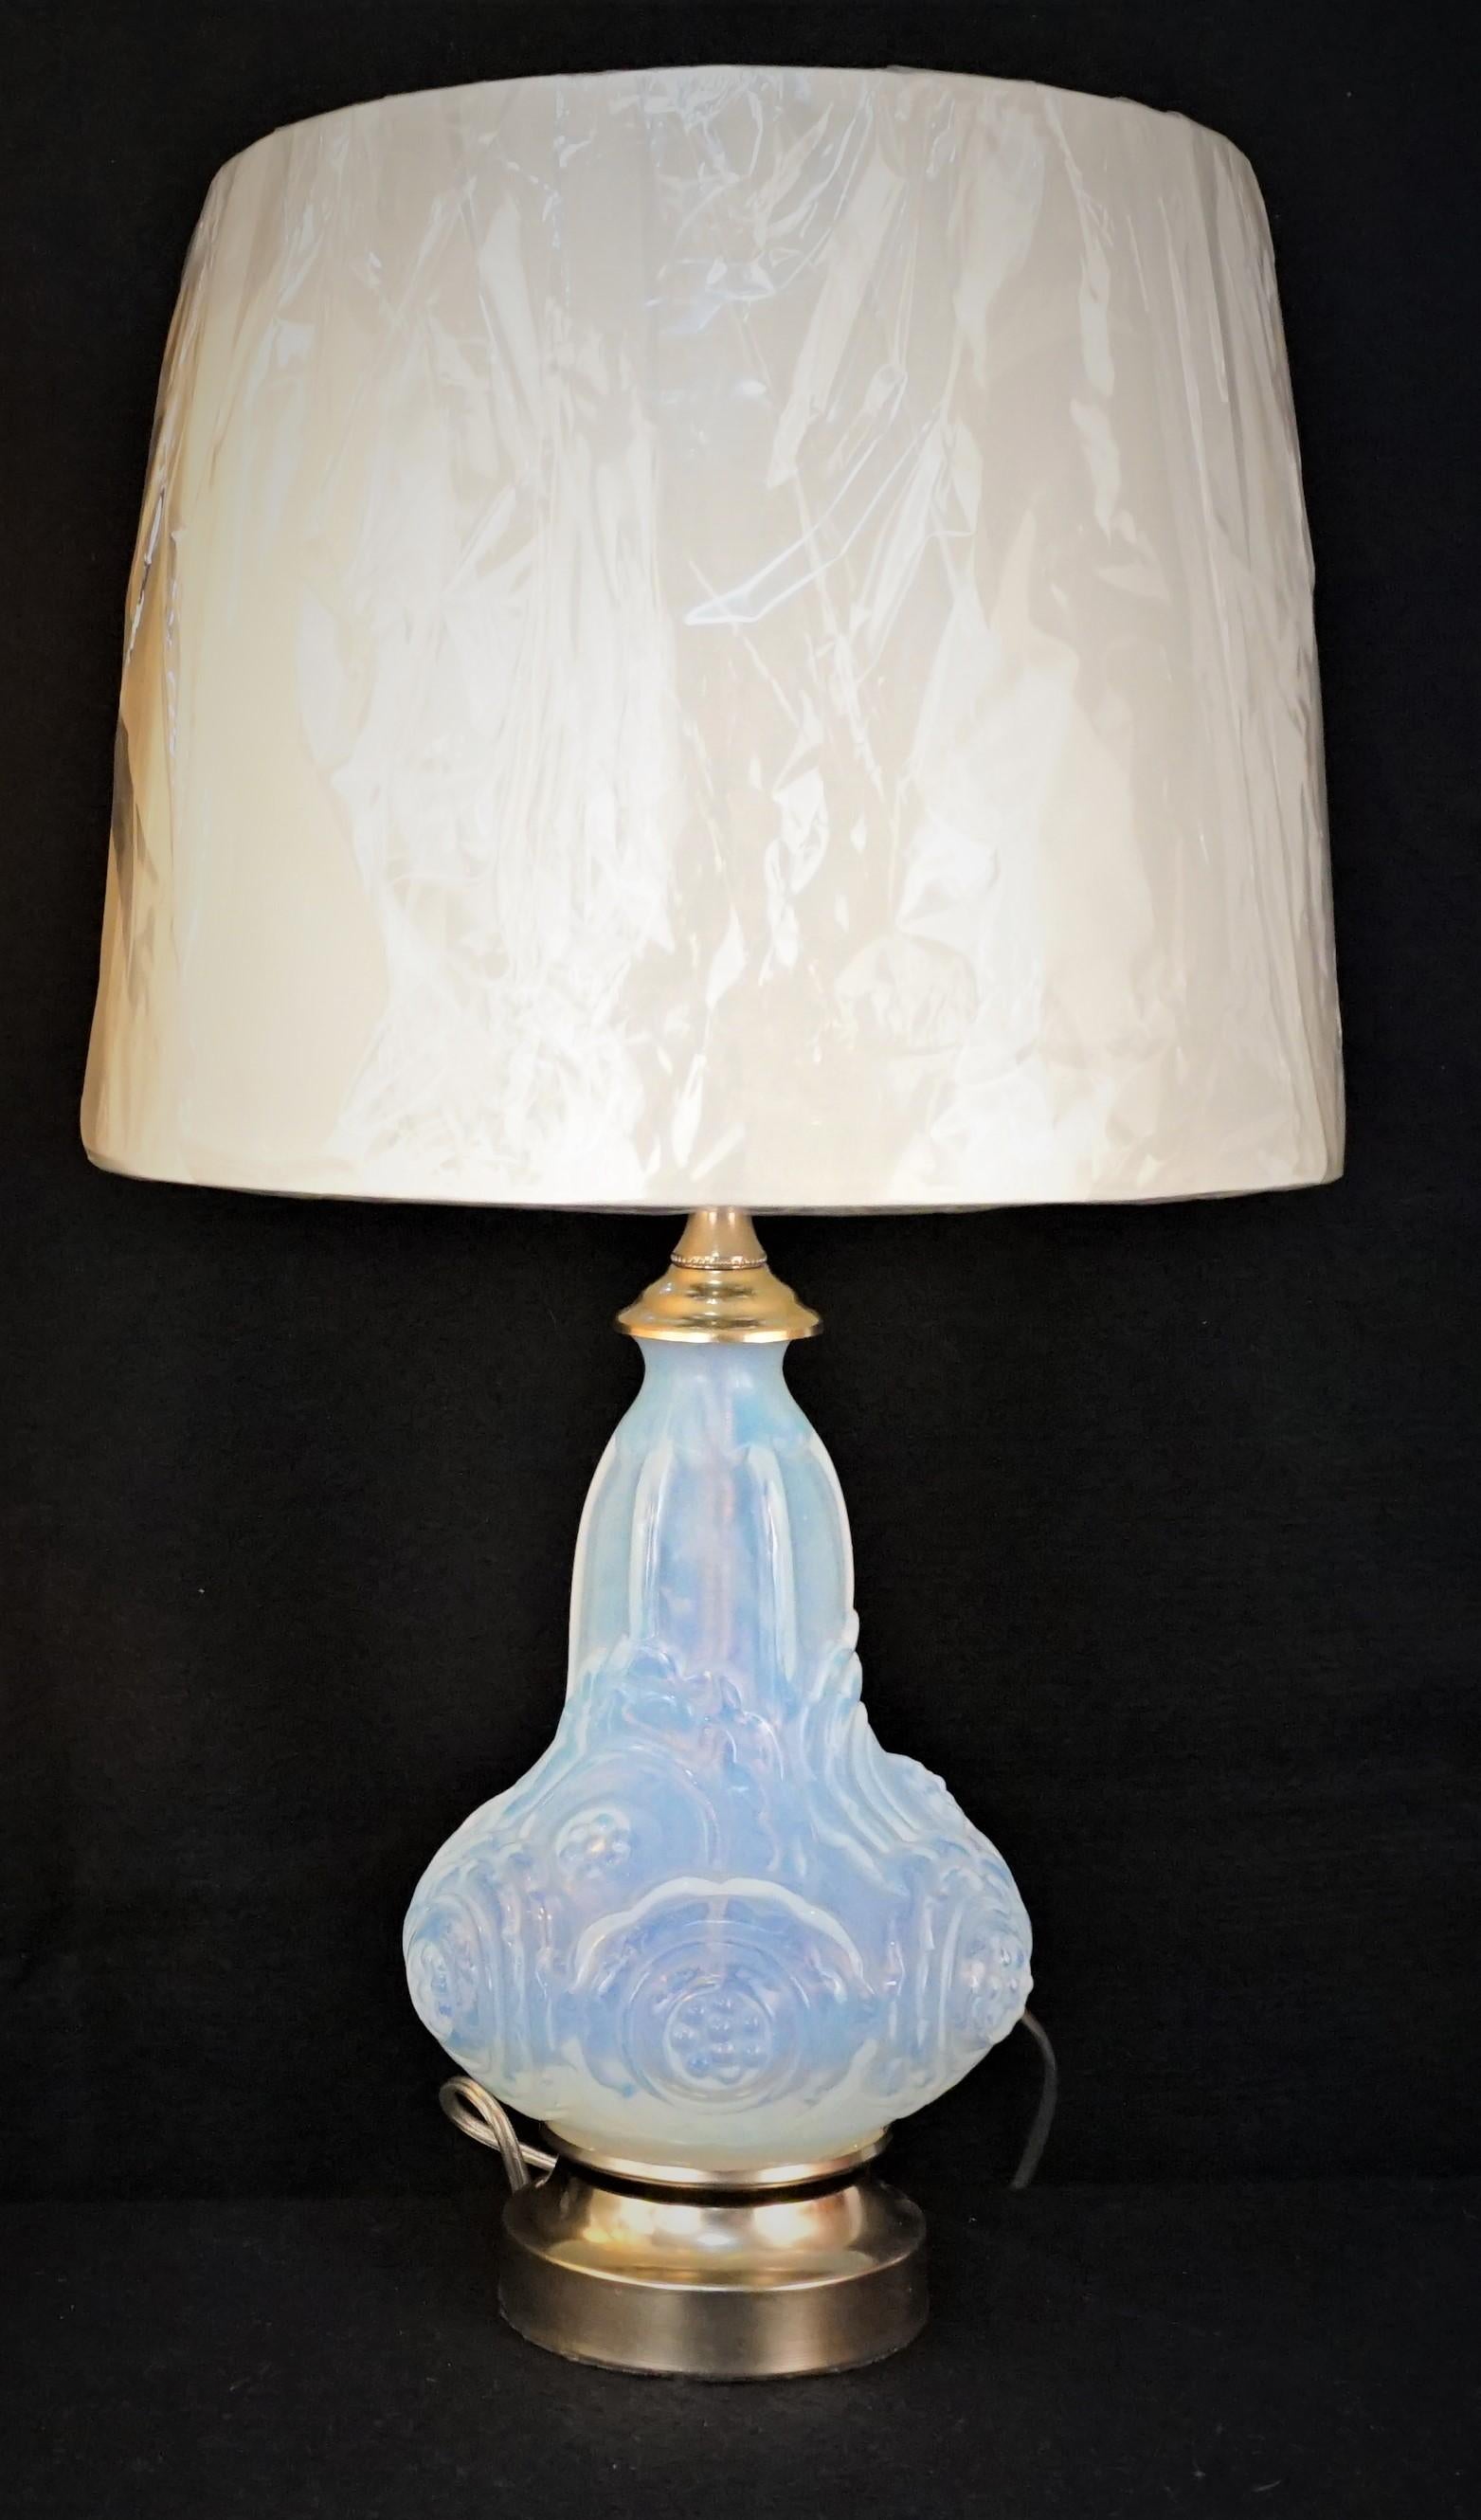 Pair of 1920's Art Deco Opaline Glass Table Lamps In Good Condition For Sale In Fairfax, VA